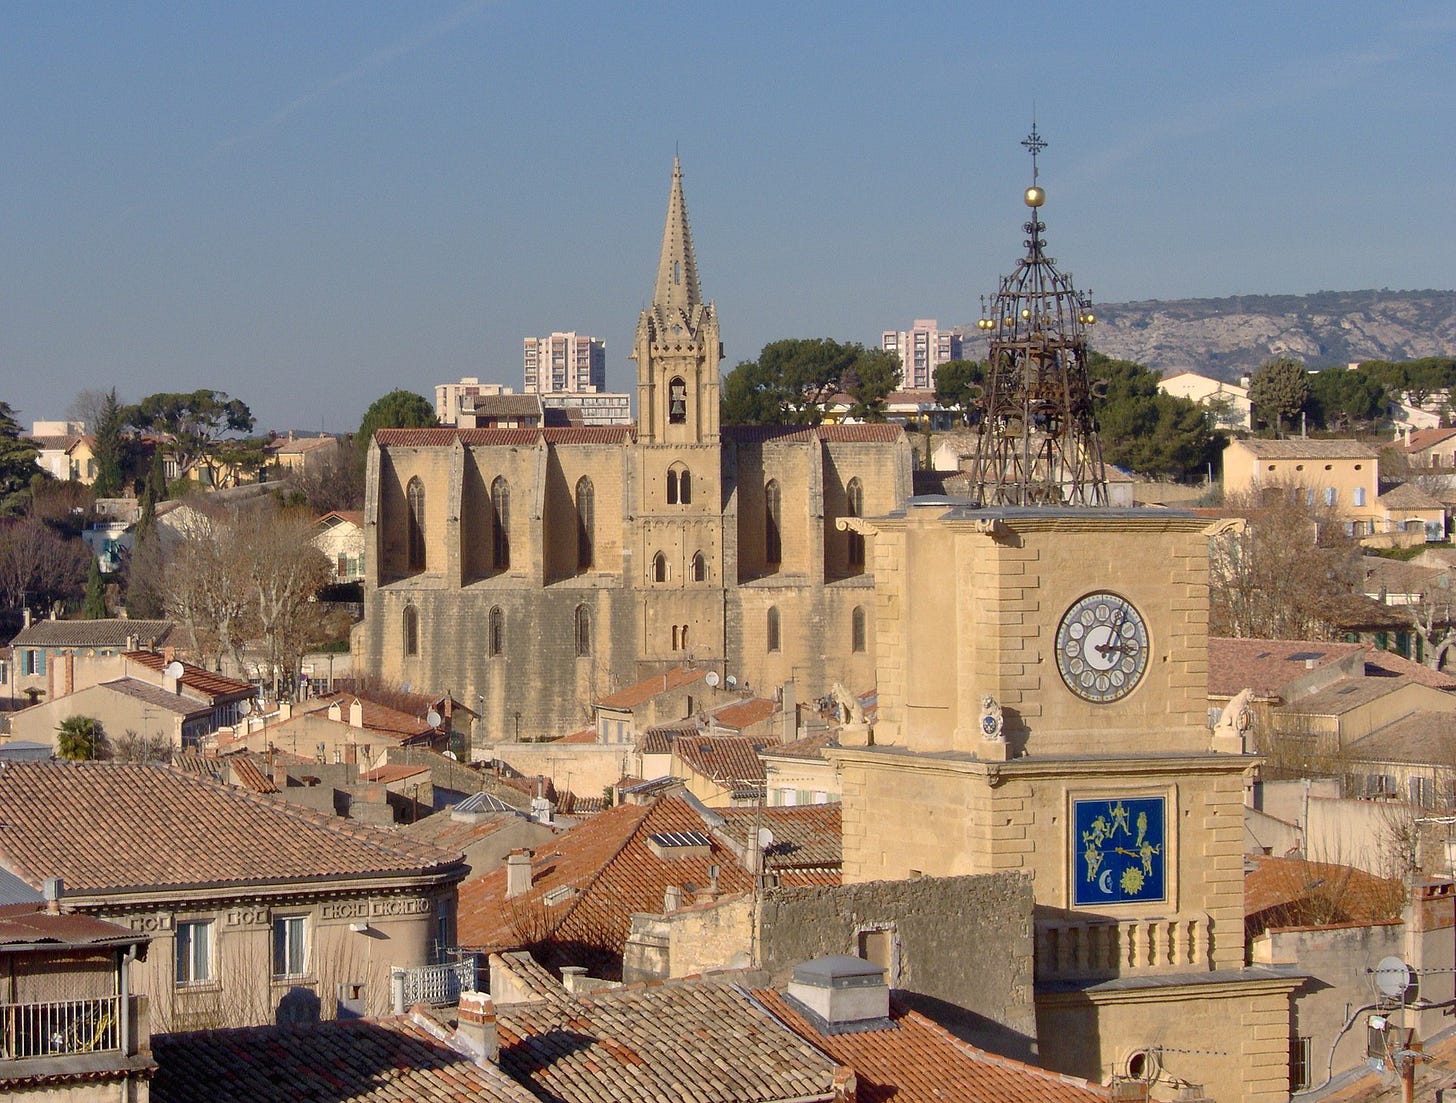 A view of Salon-de-Provence, with the church and clock tower